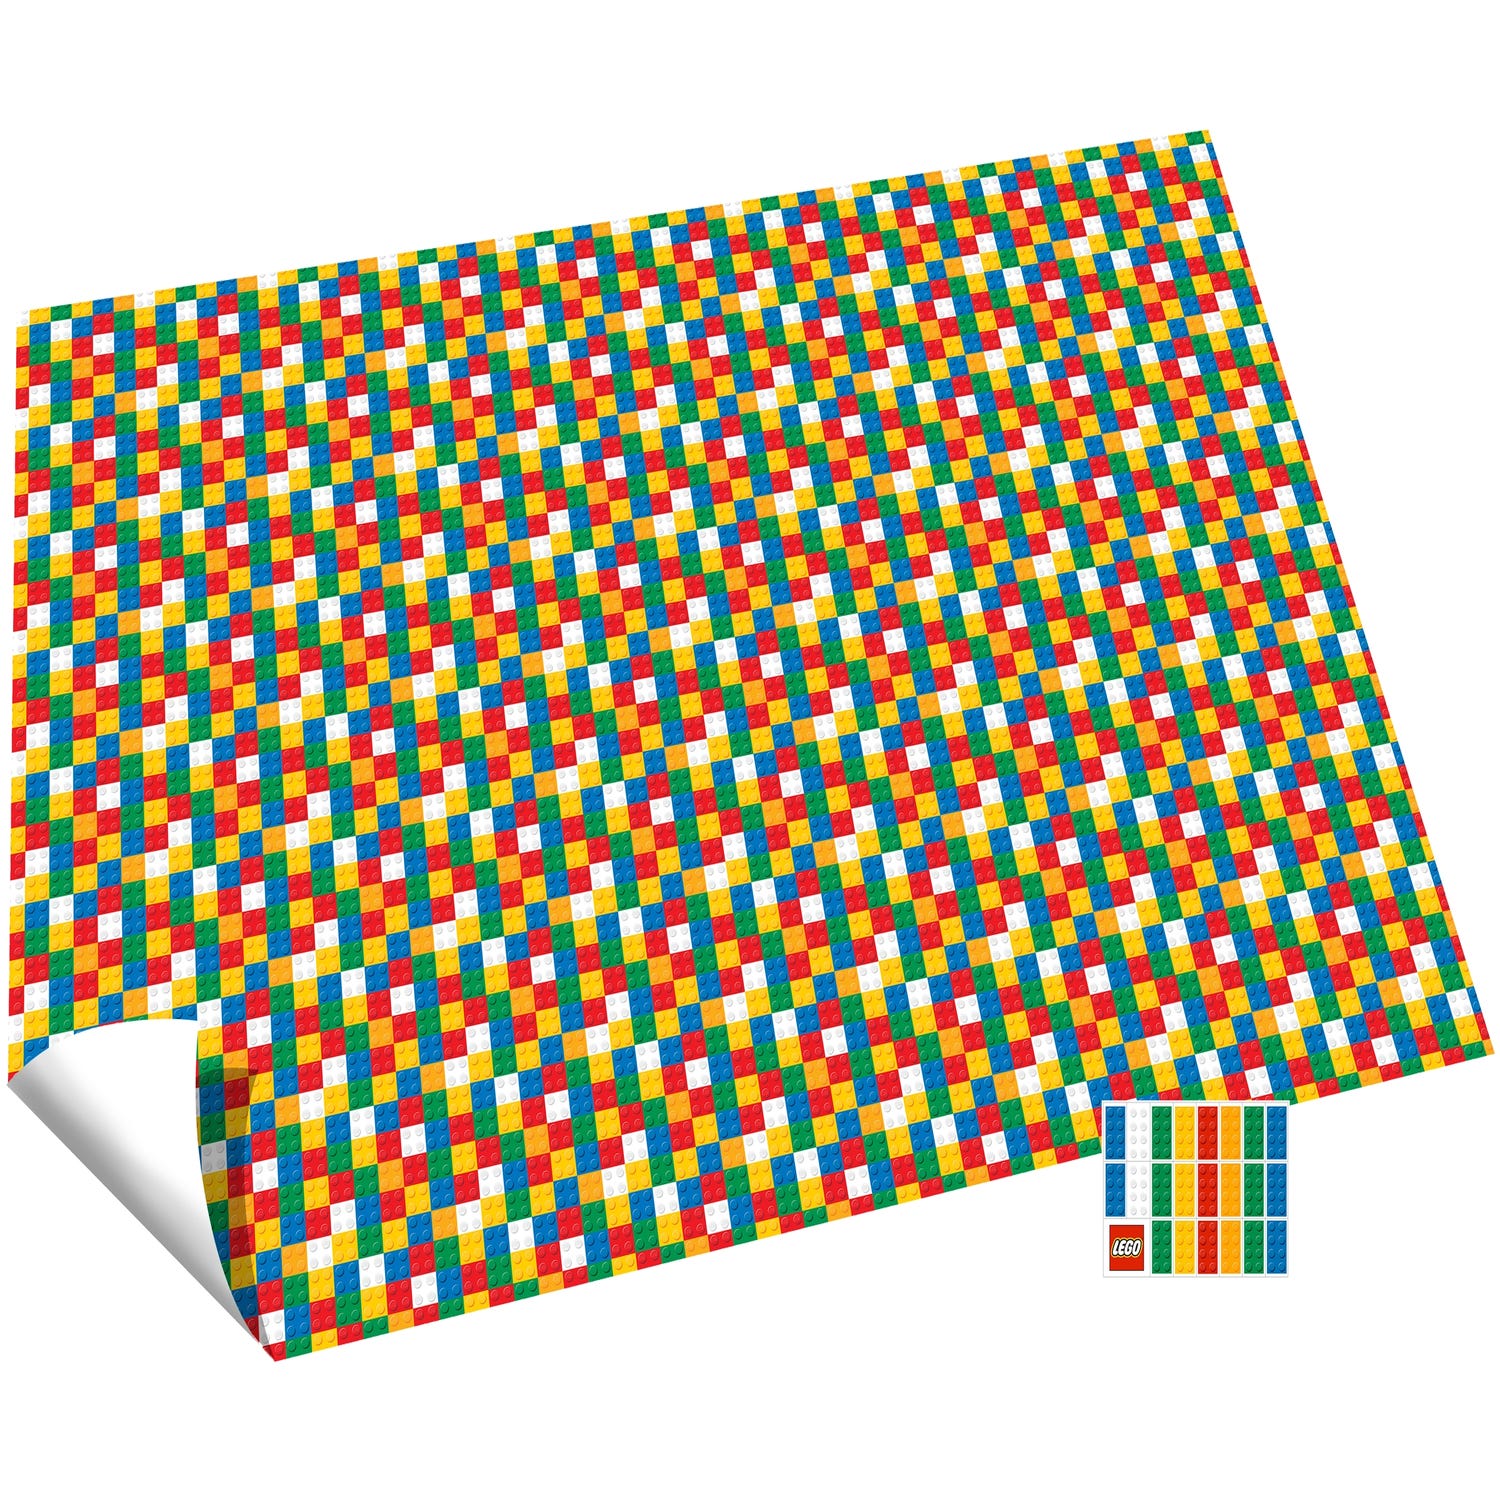 Wrap and Roll - We have Lego wrapping paper too!